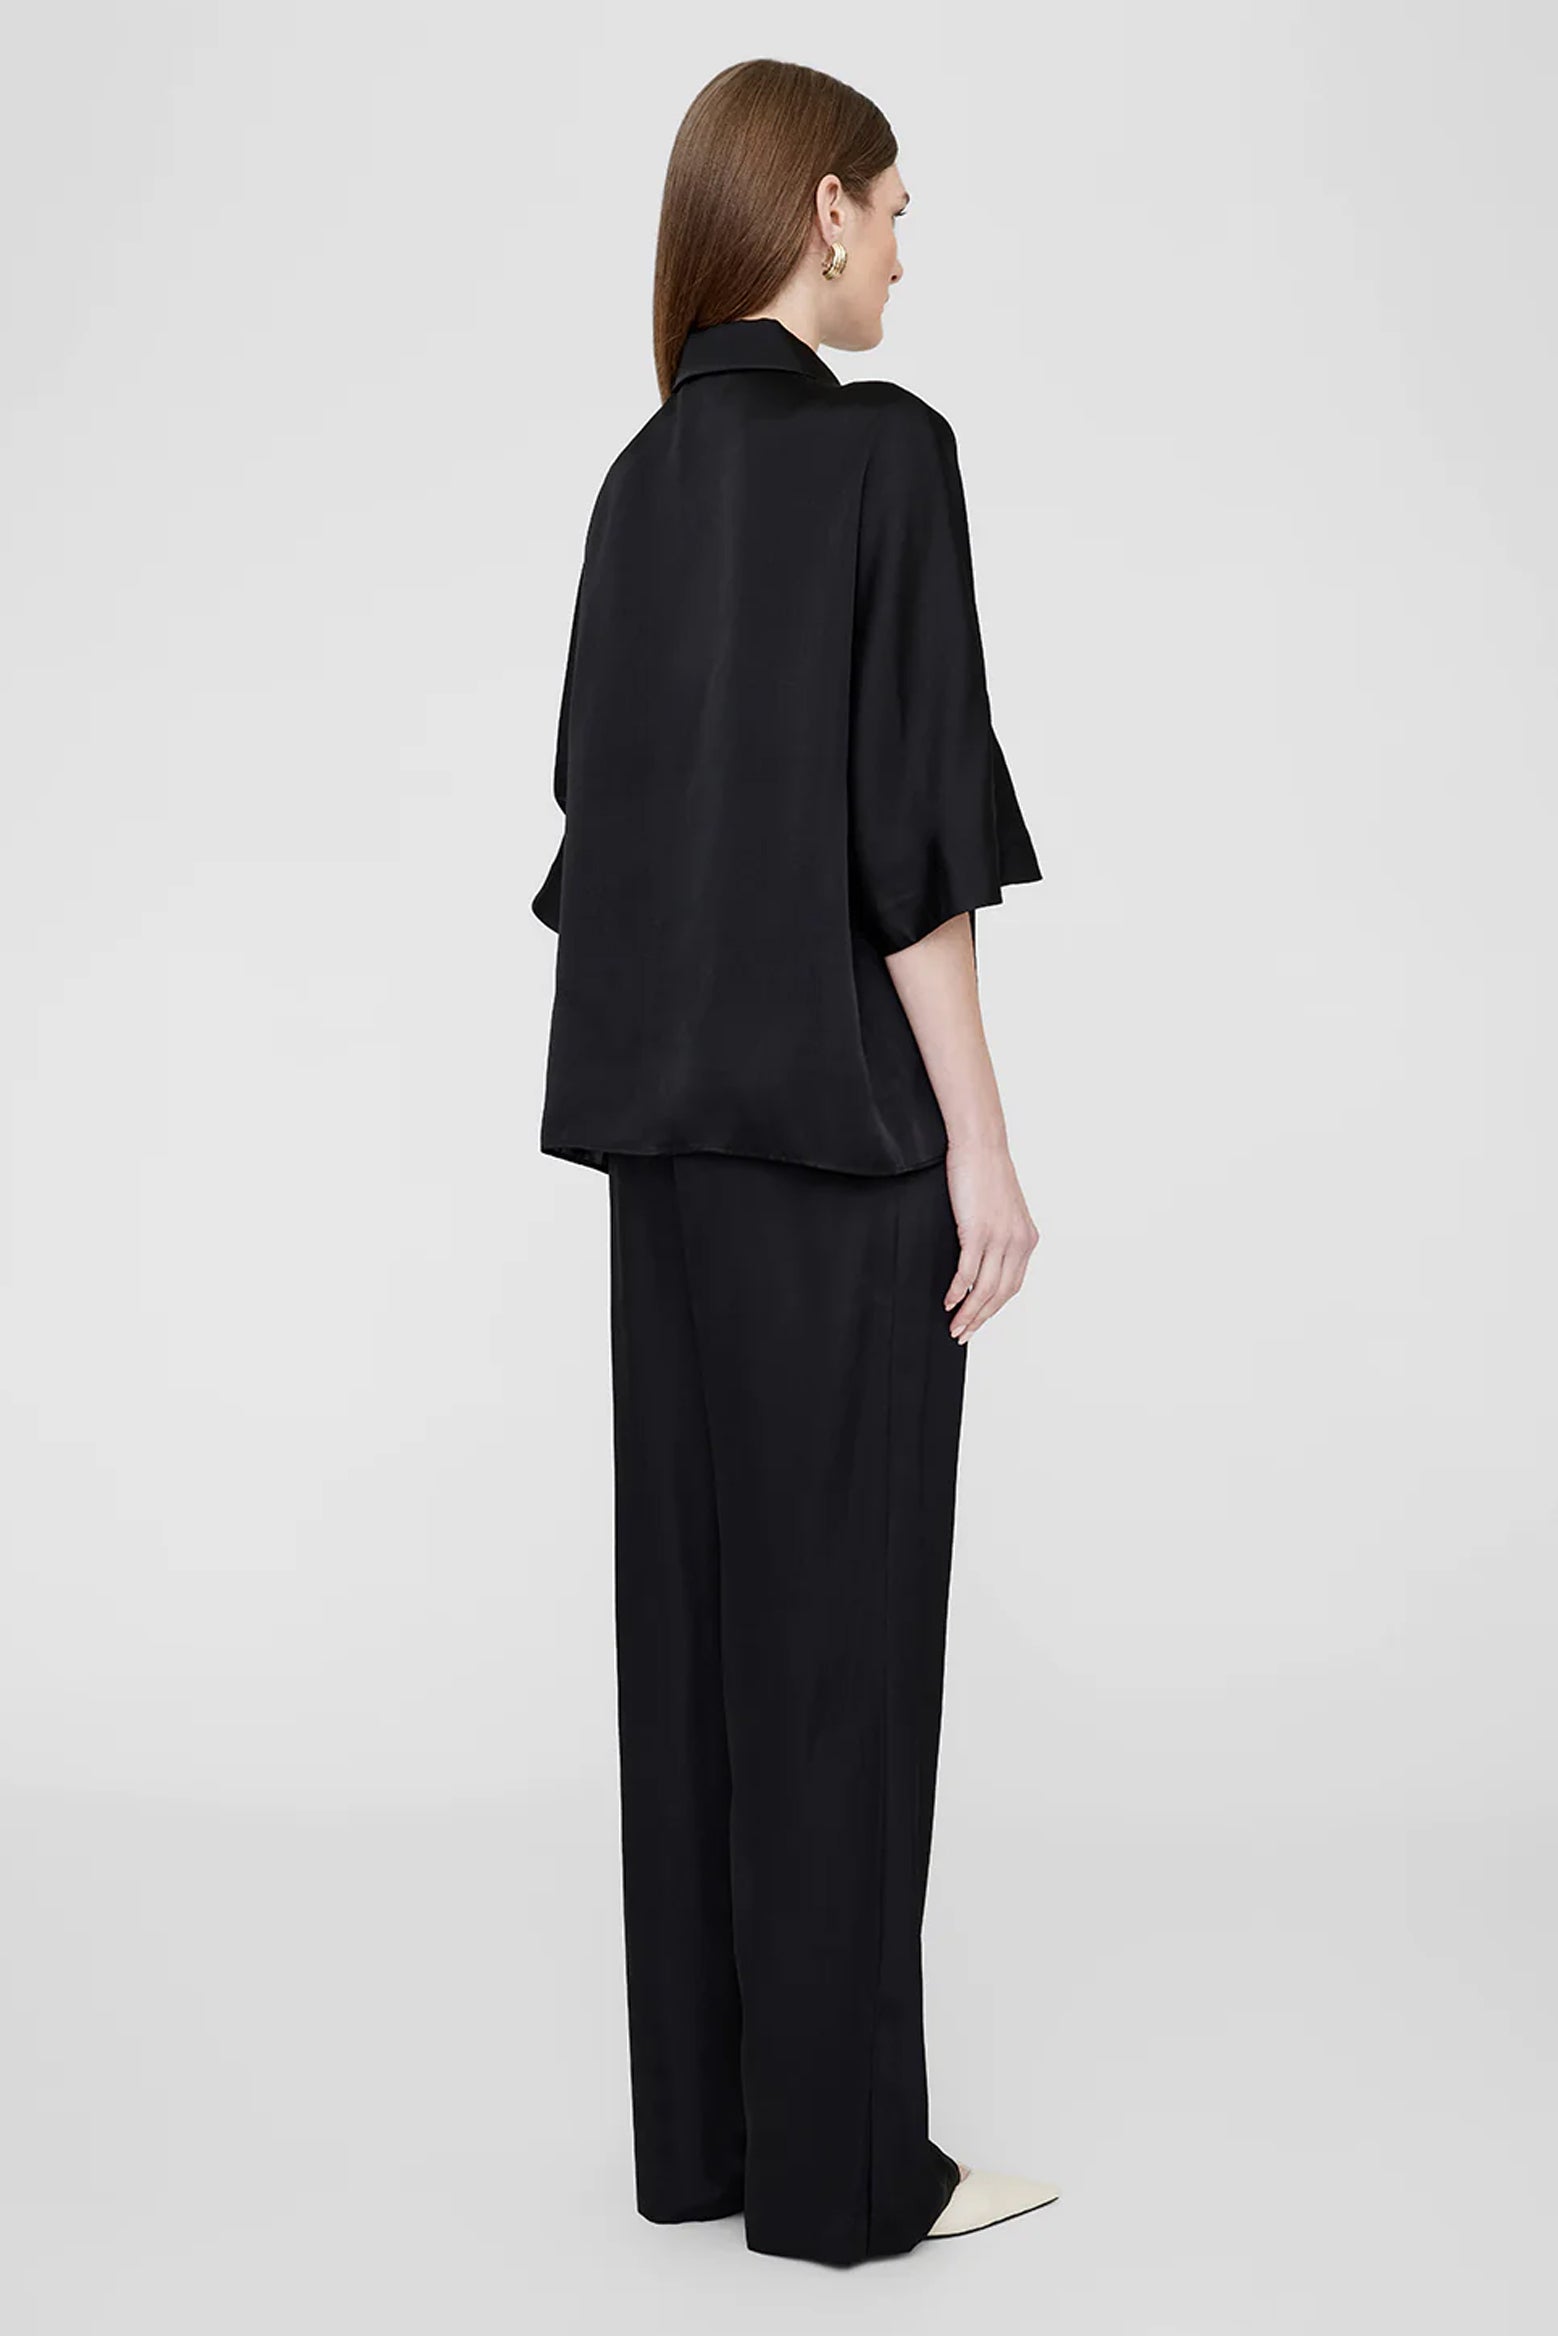 Anine Bing Julia Shirt in Black available at The New Trend Australia.